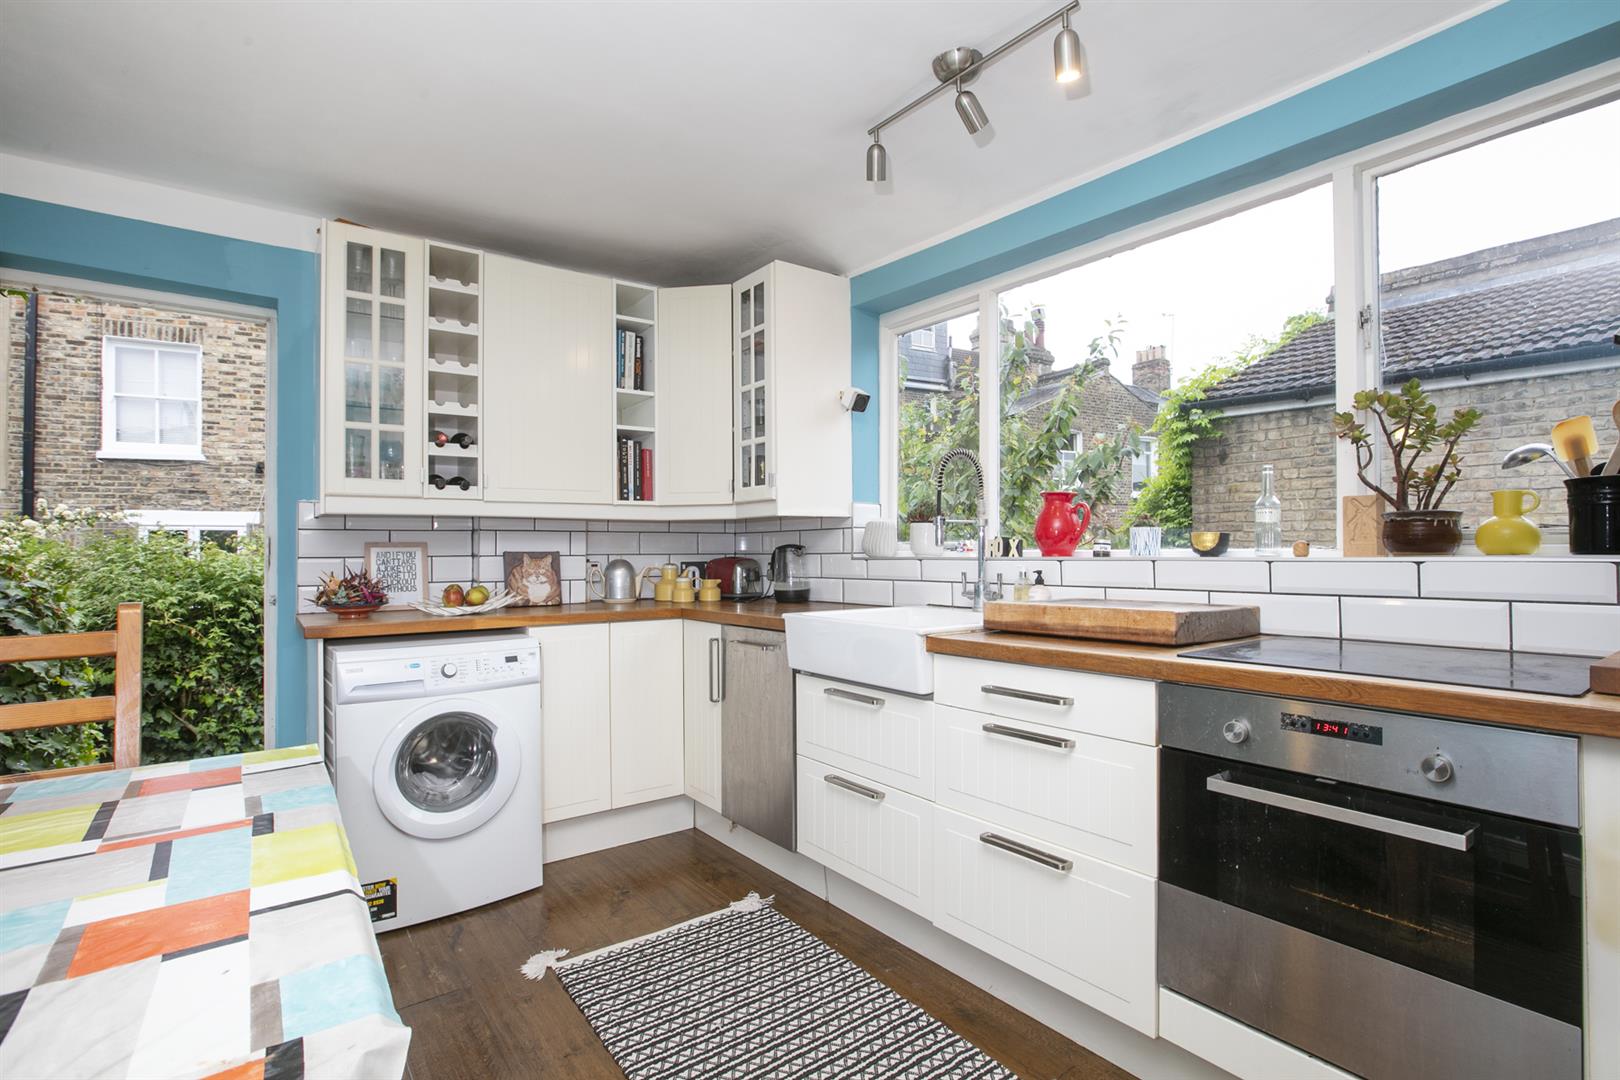 Flat - Conversion For Sale in Gairloch Road, Camberwell, SE5 956 view4